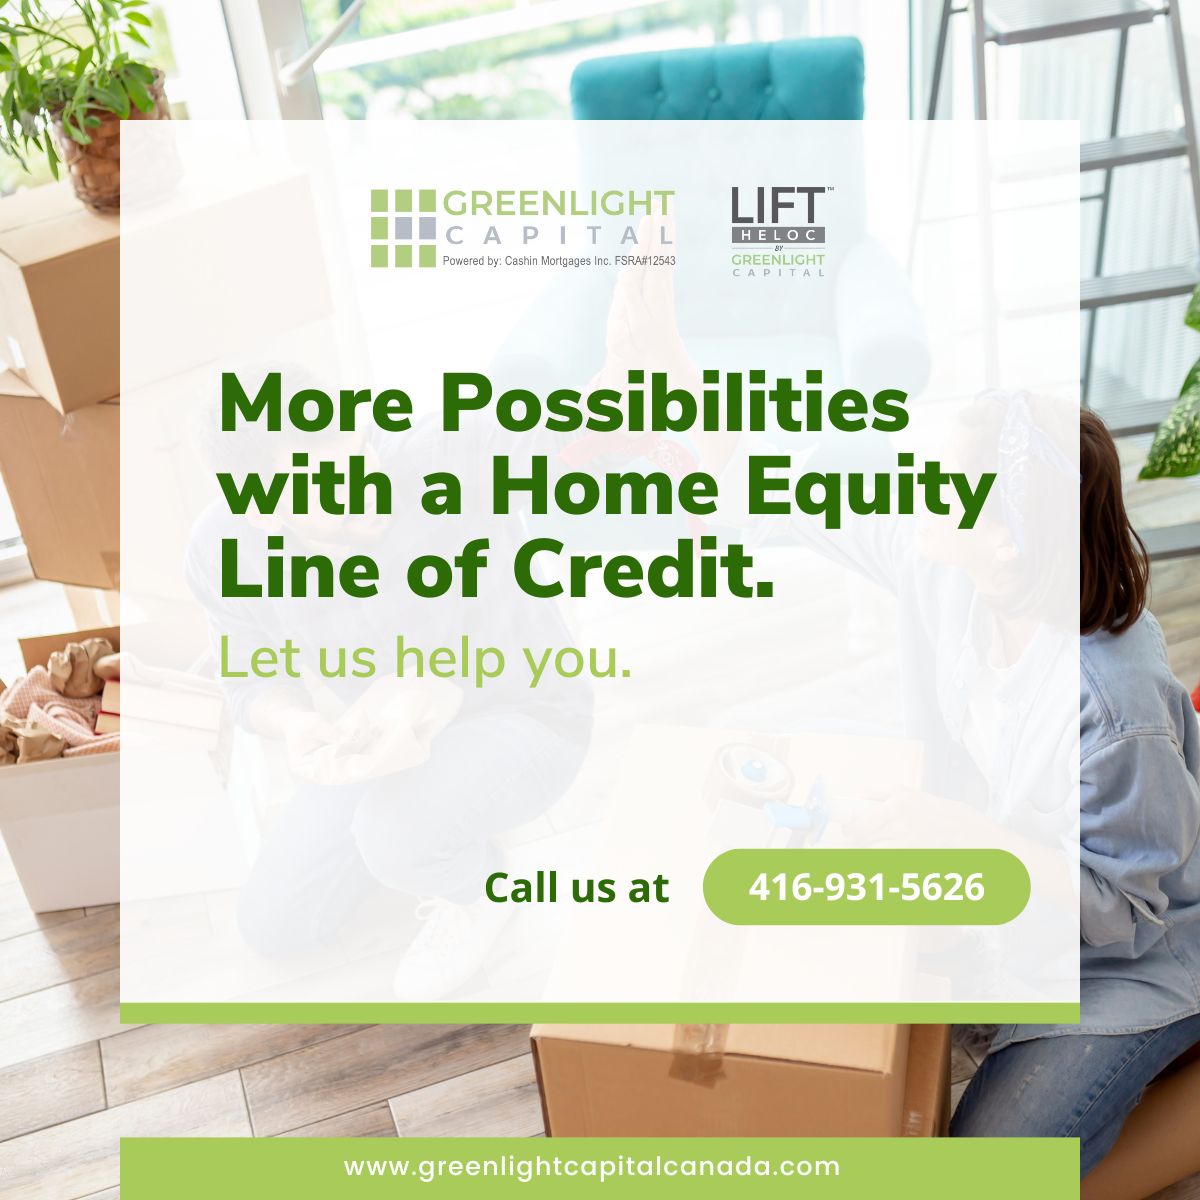 Unlock More Possibilities with a Home Equity Line of Credit! 💼🏠 Ready to tap into your home's equity for financial flexibility? Call us today to explore your options and take the next step towards achieving your goals. 

#HomeEquity #LineOfCredit #Greenlightcapital